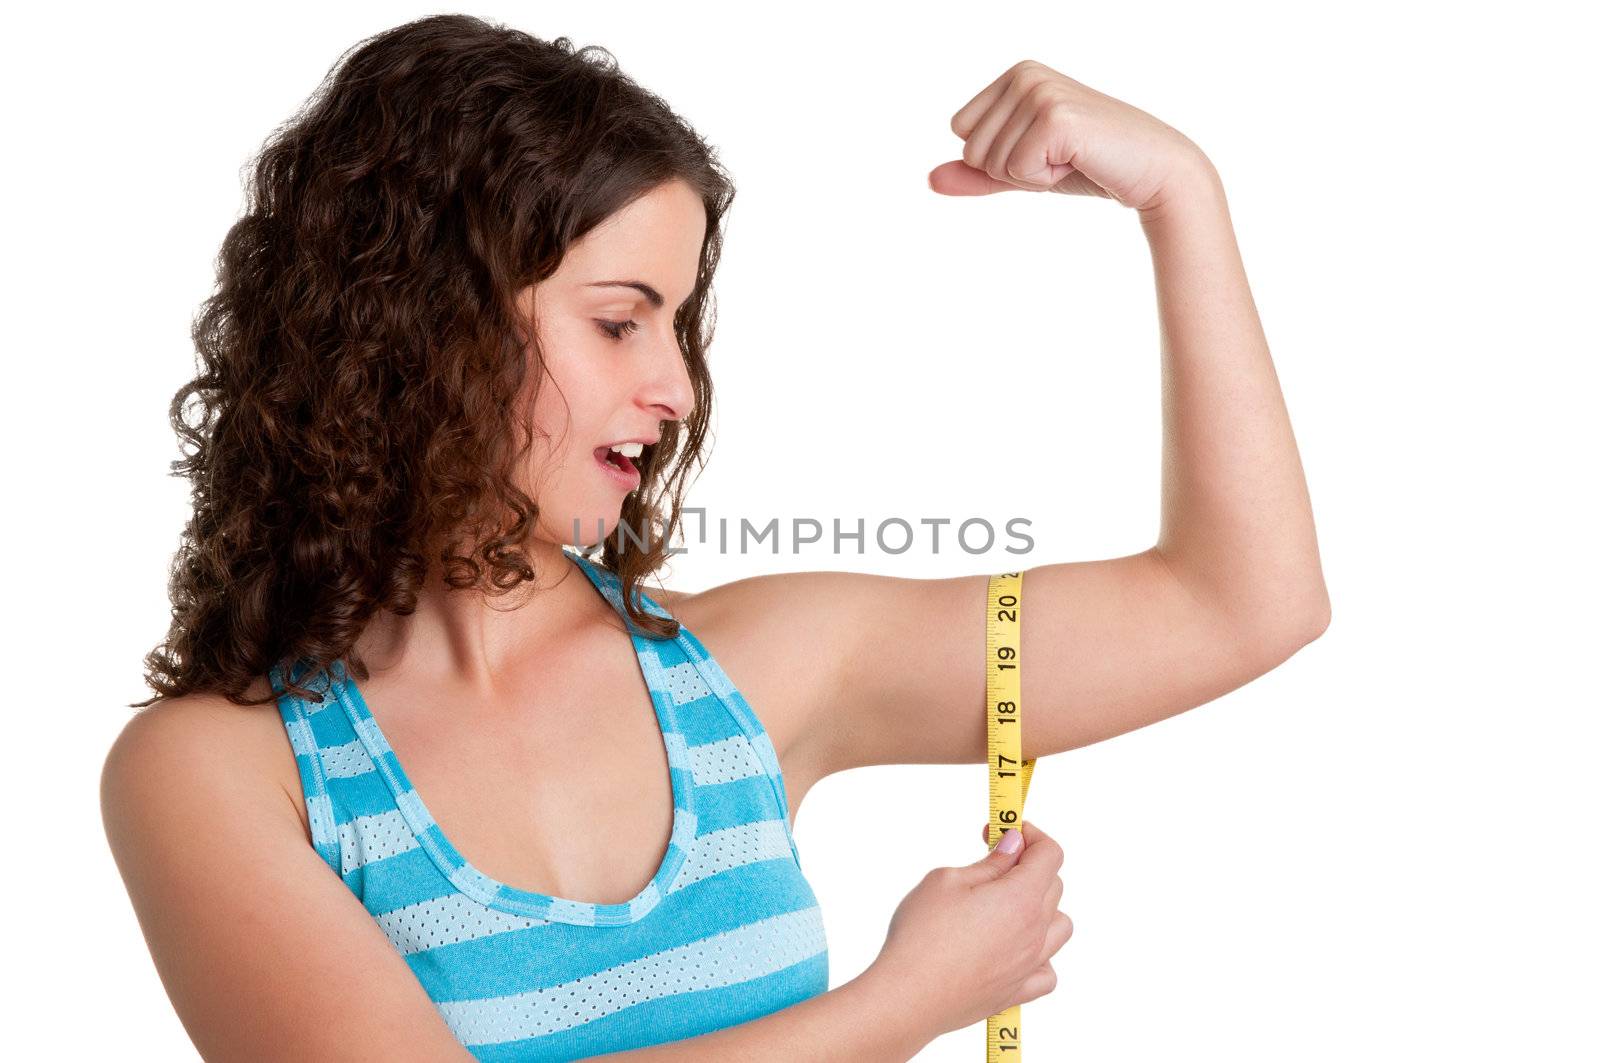 Surprised woman measuring her Biceps, isolated in a white background